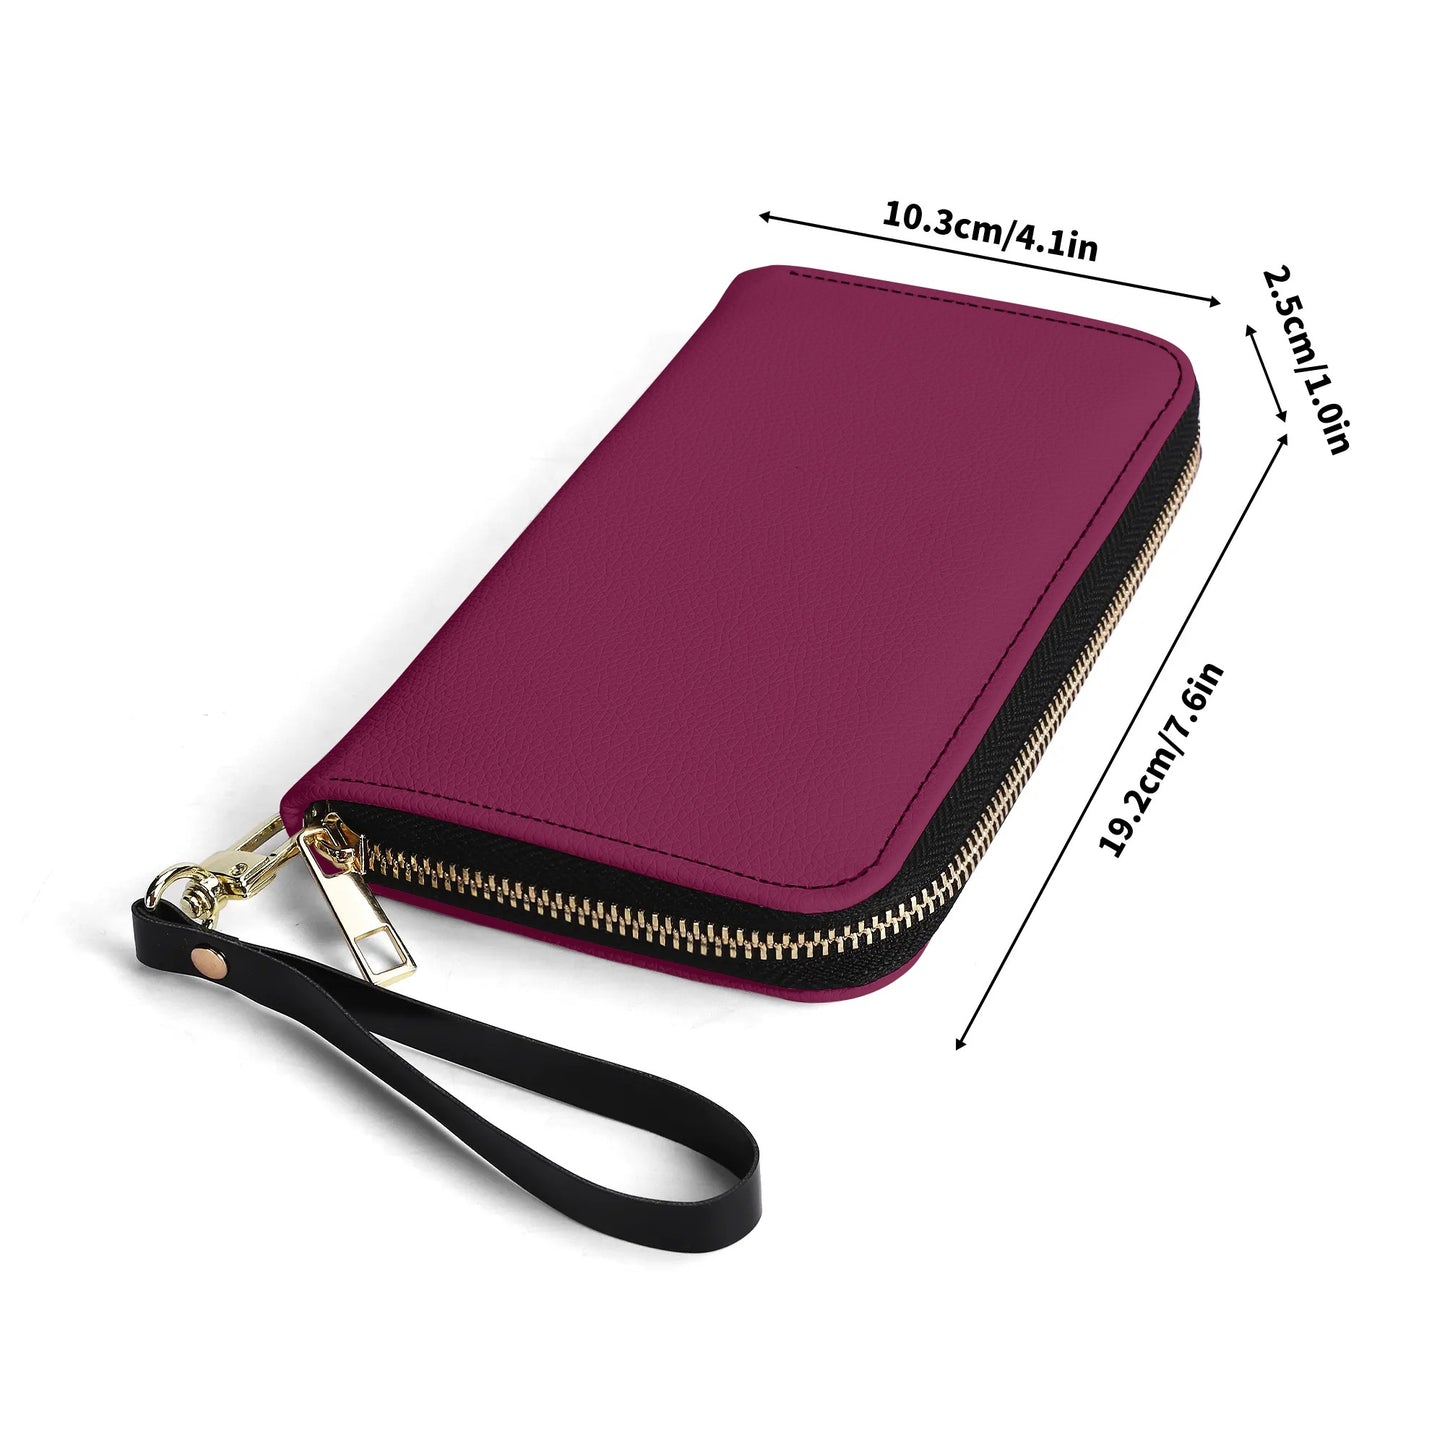 Saved With Amazing Grace PU Leather Womens Christian Wallet